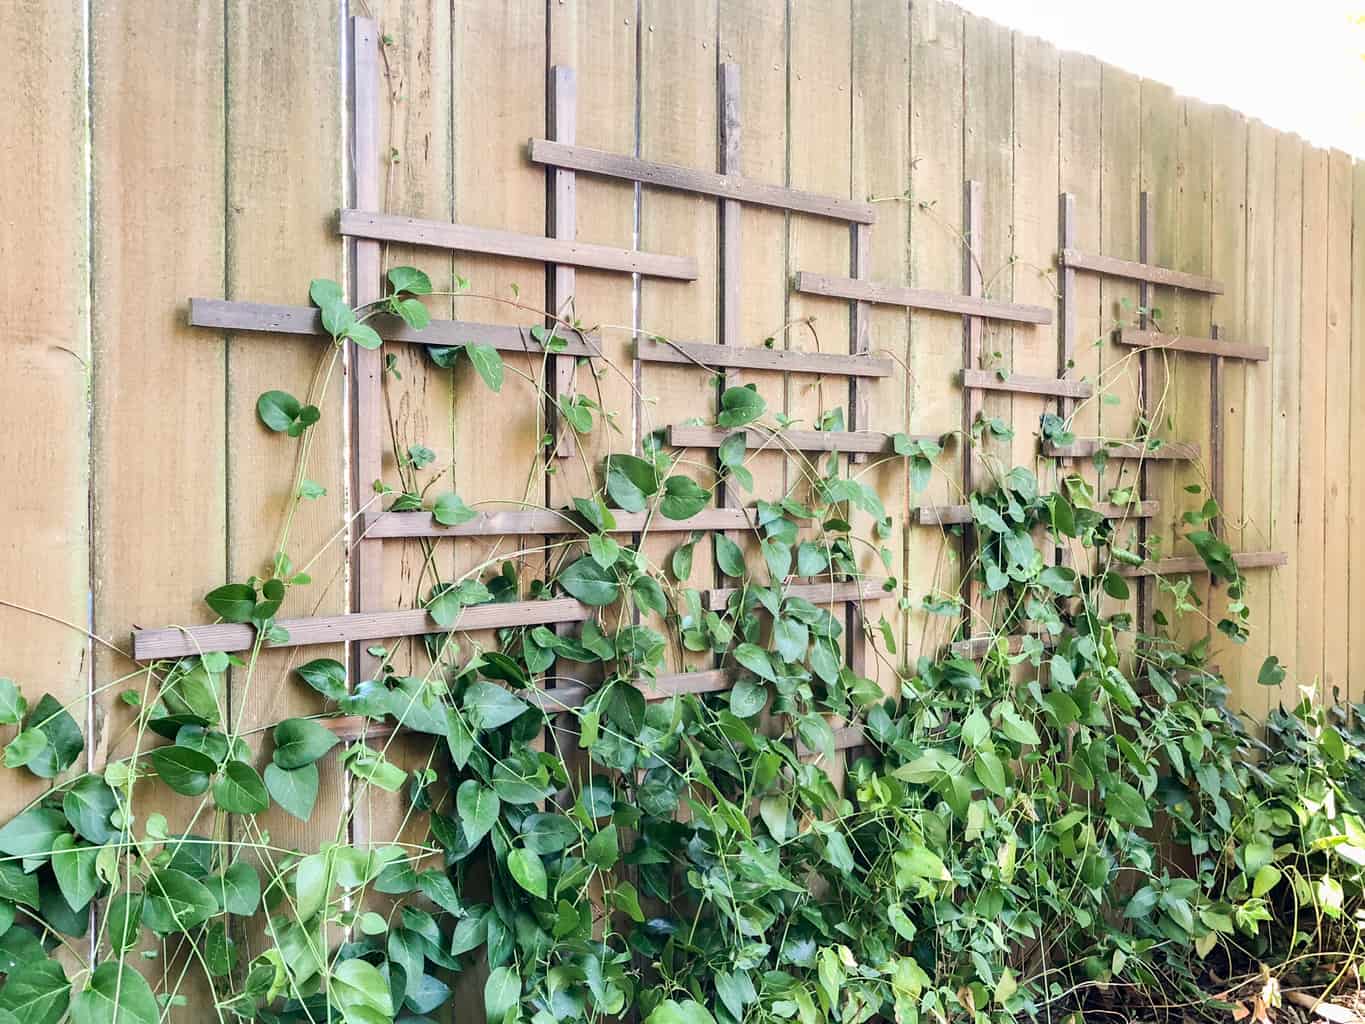 clematis trellis with vines growing on fence